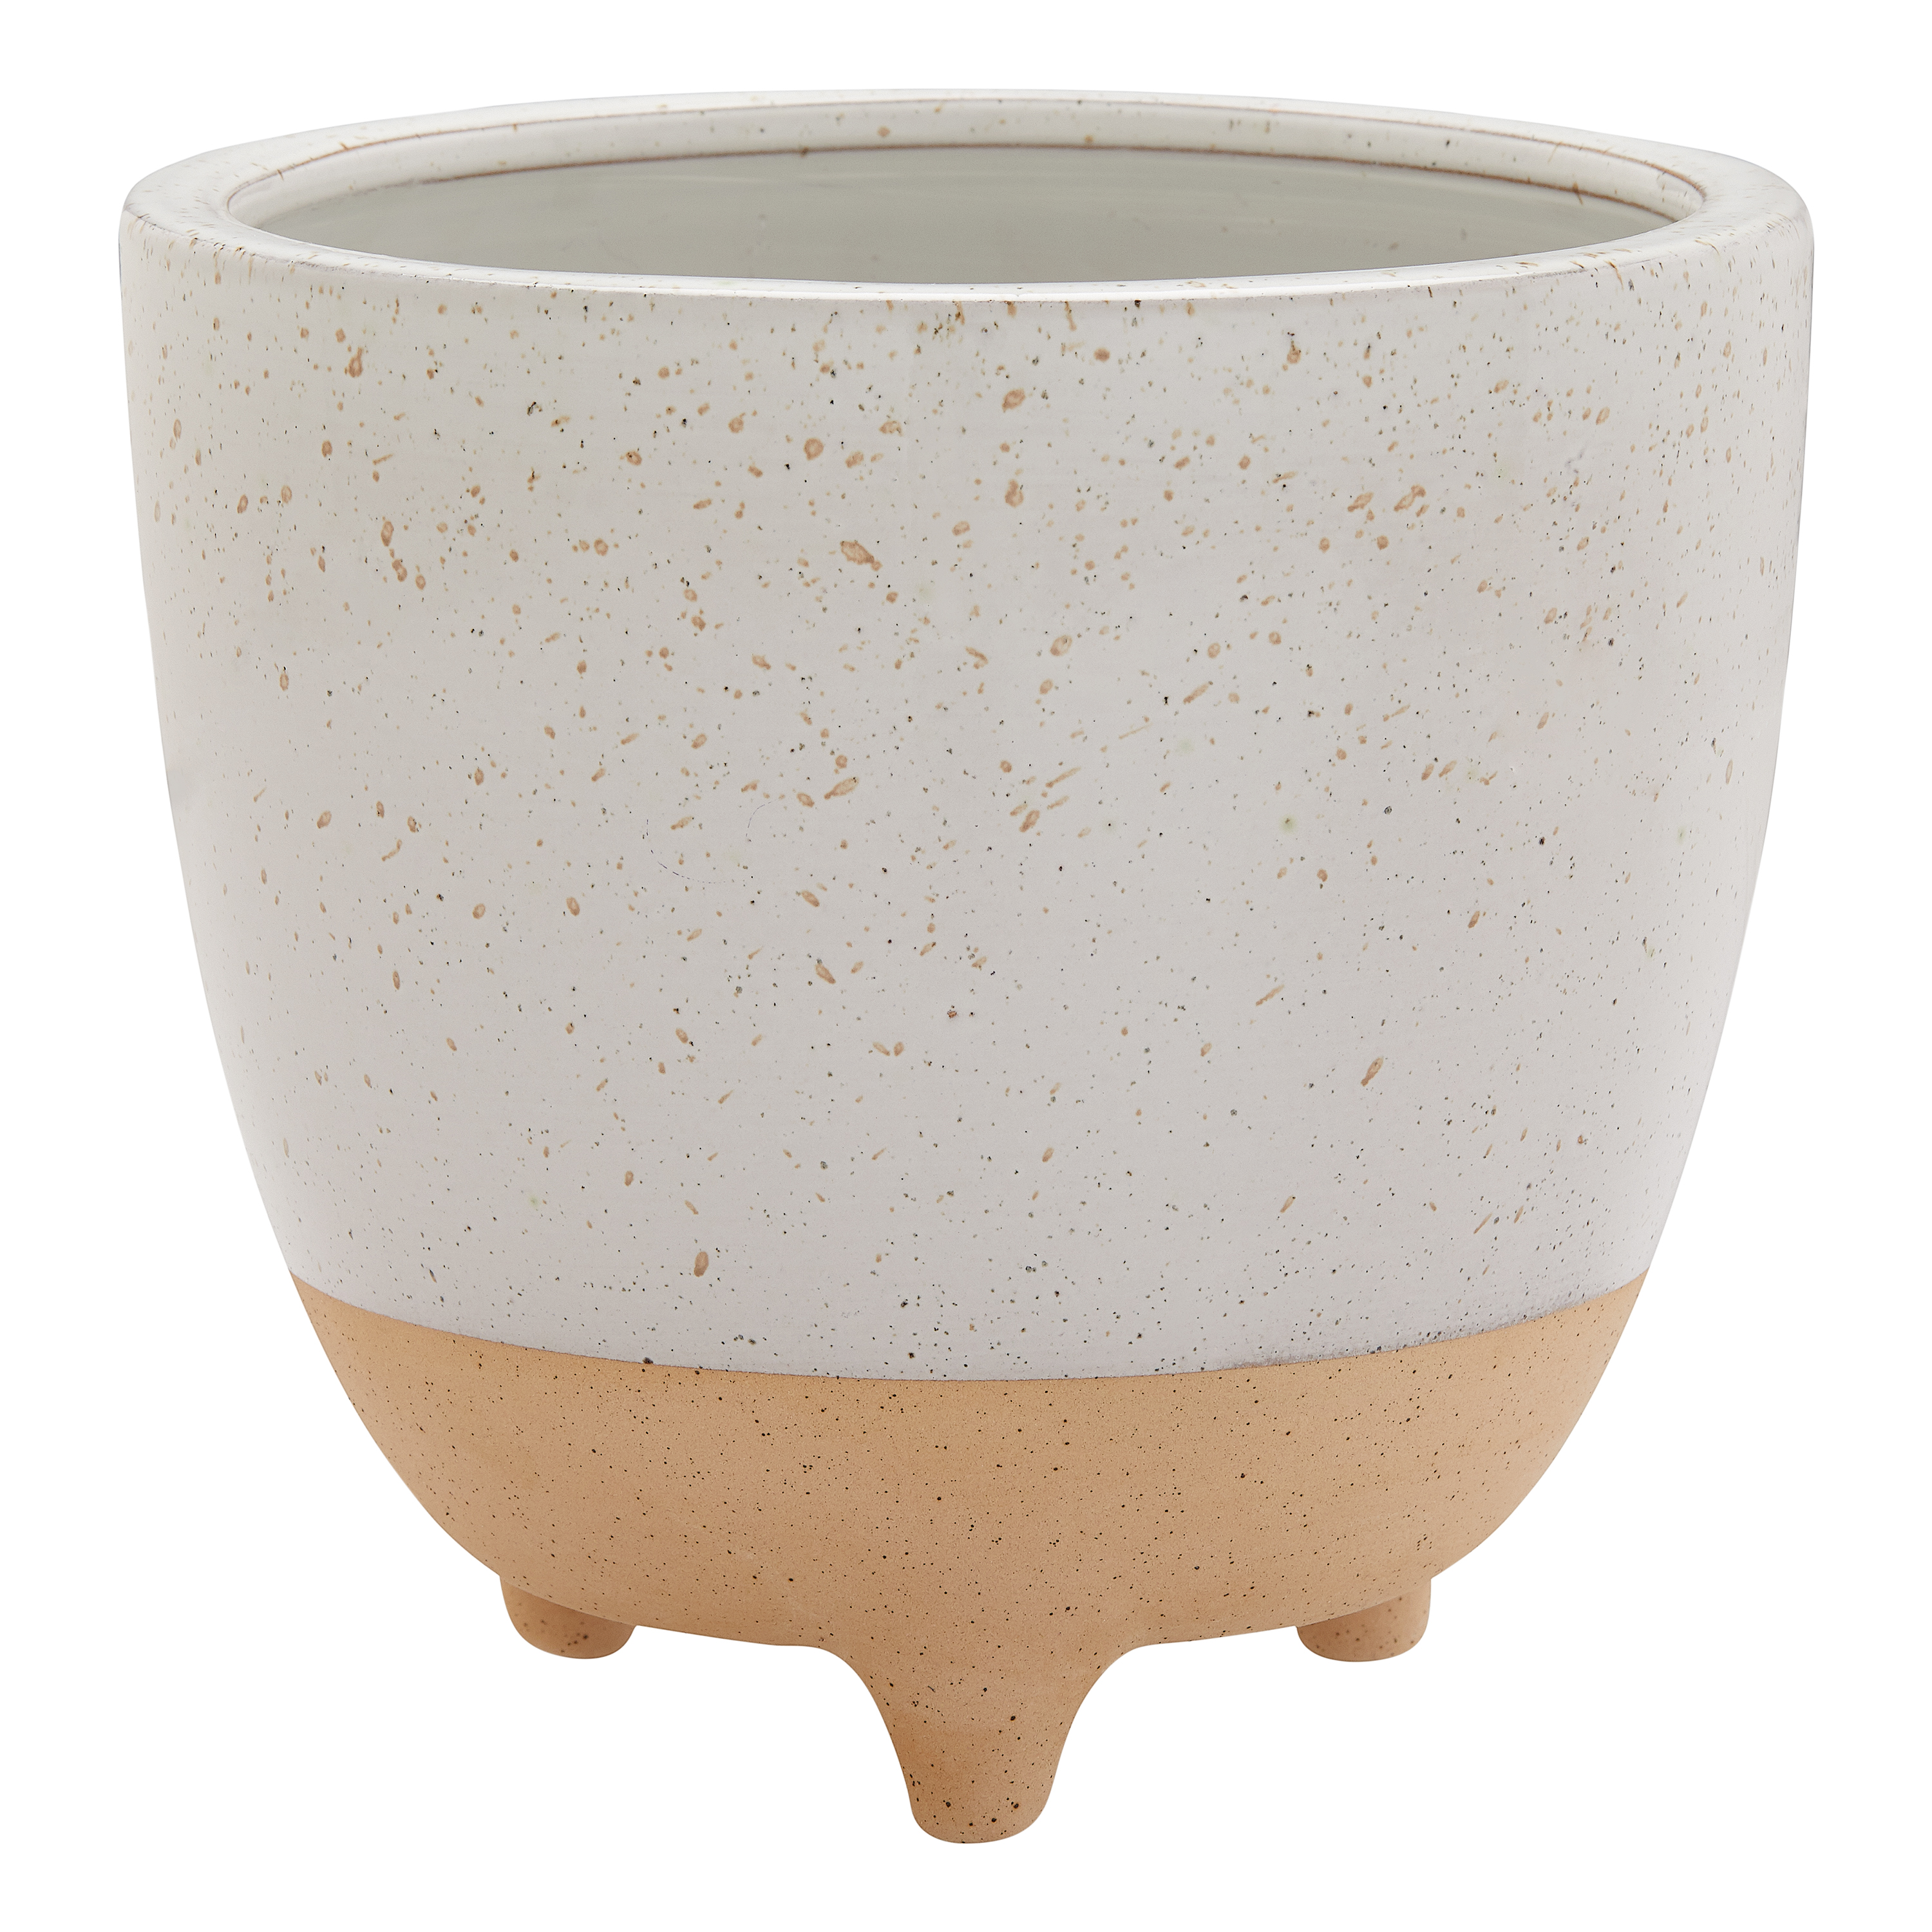 Better Homes & Gardens 10" x 10" x 9" Round White and Beige Ceramic Plant Planter - image 1 of 4